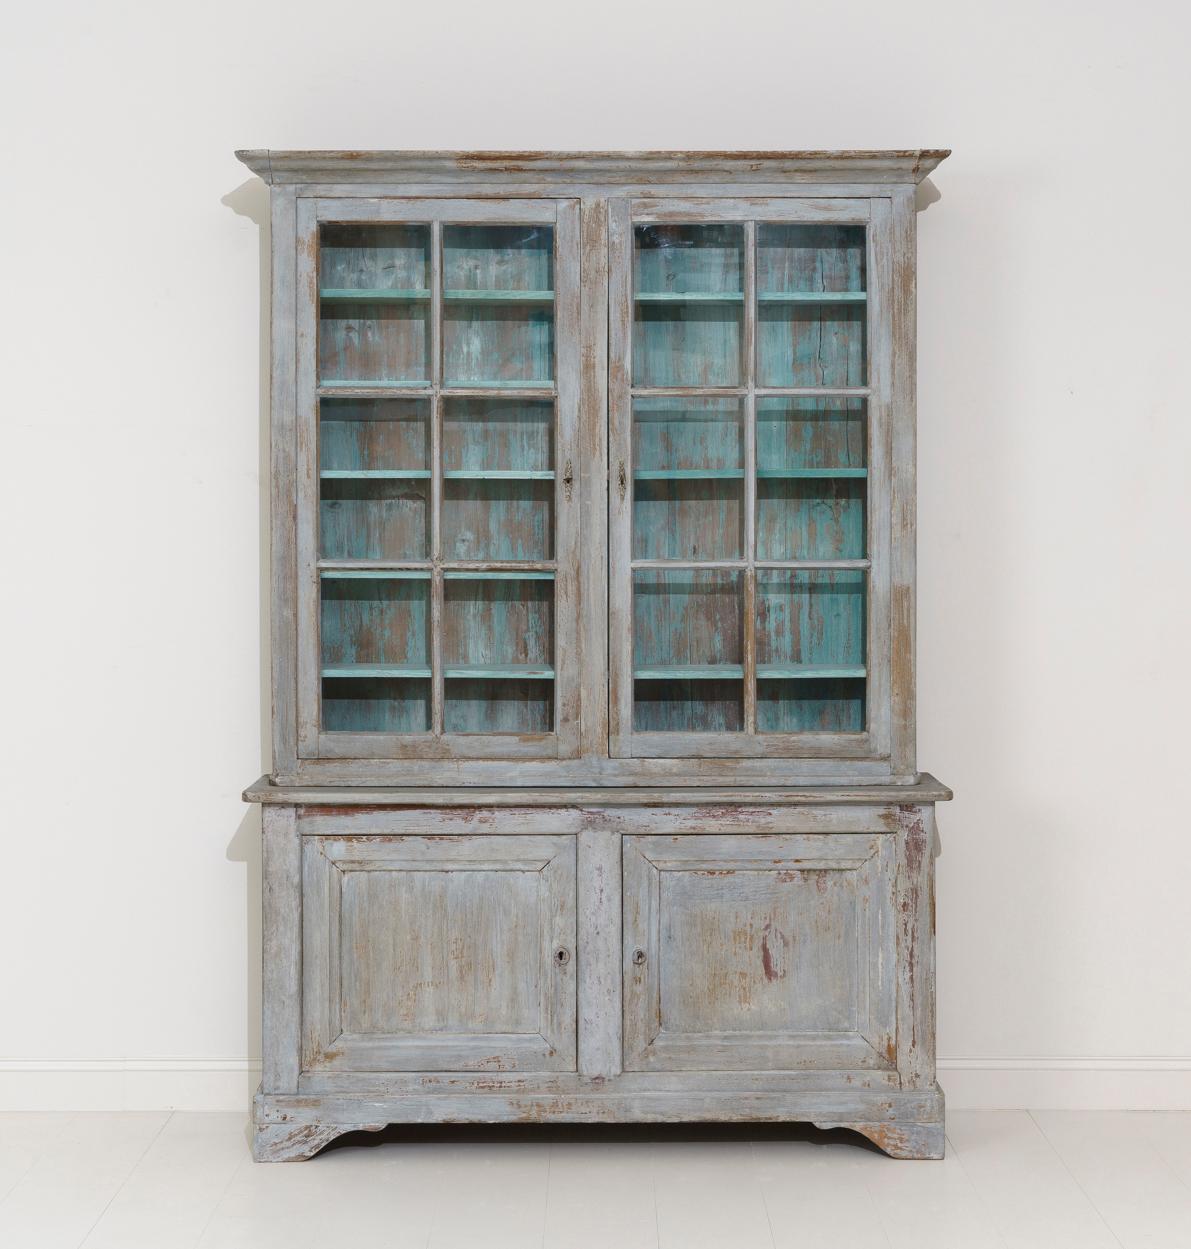 A beautiful French two-part painted library or bookcase in the Louis Philippe style with original glass from the Provence region of France. The exterior color of this buffet deux corps is blue - gray and the interior a French blue. The upper cabinet